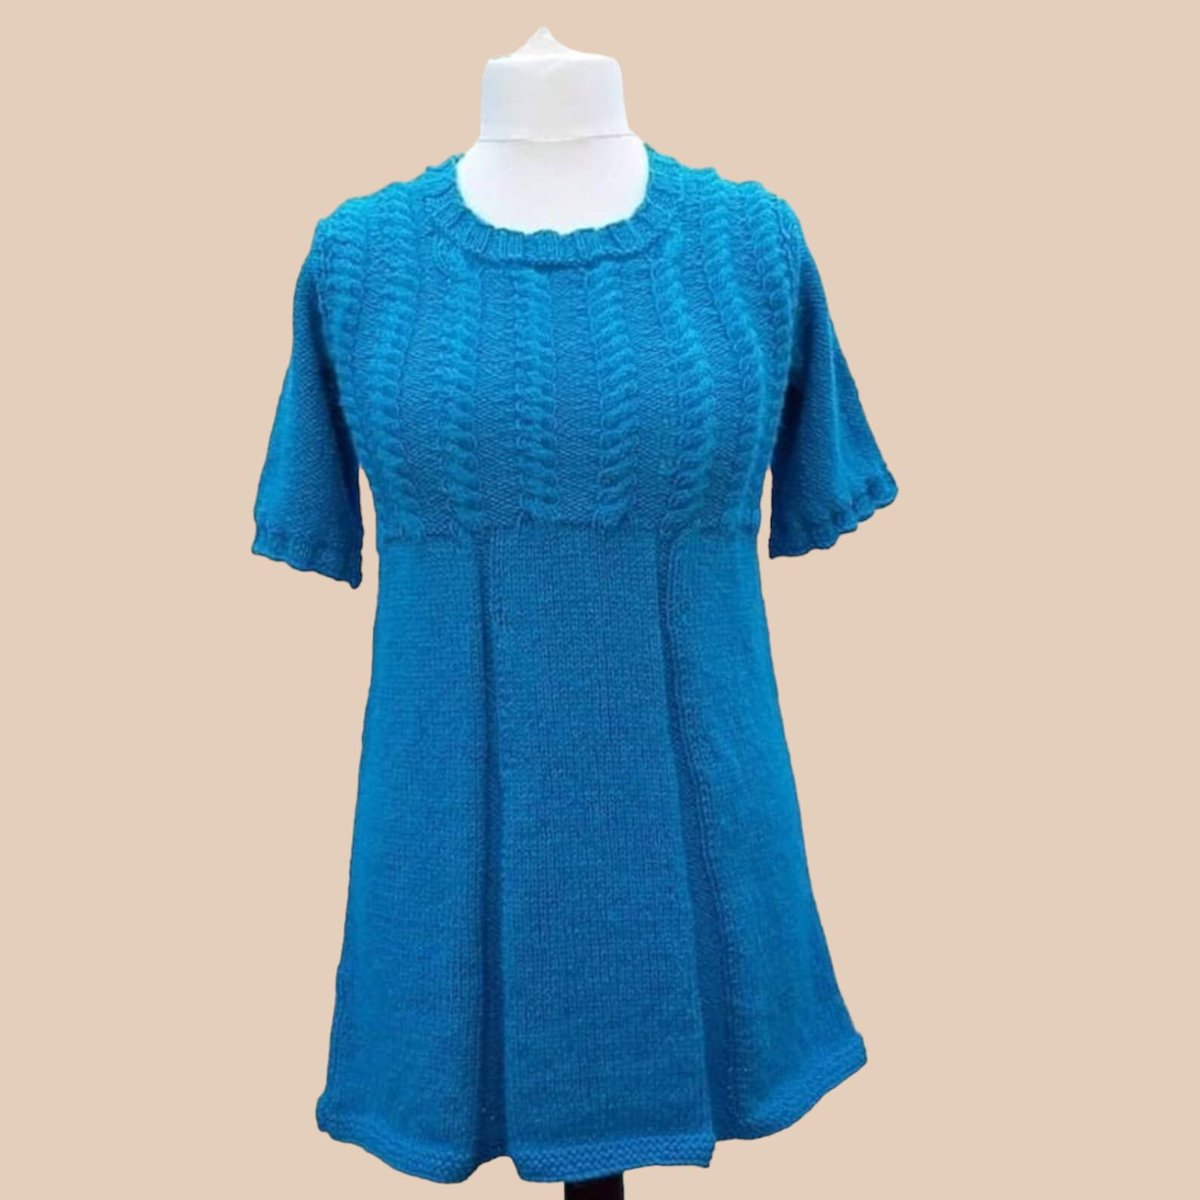 Experience summer in style with this custom Alpaca Tunic, hand-knitted and available in sizes S-XXXL. Choose your favorite color for the perfect gift! Visit knittingtopia.etsy.com/listing/168059… now. #knittingtopia #etsy #summerfashion #ladiesknitwear #craftbizparty #MHHSBD